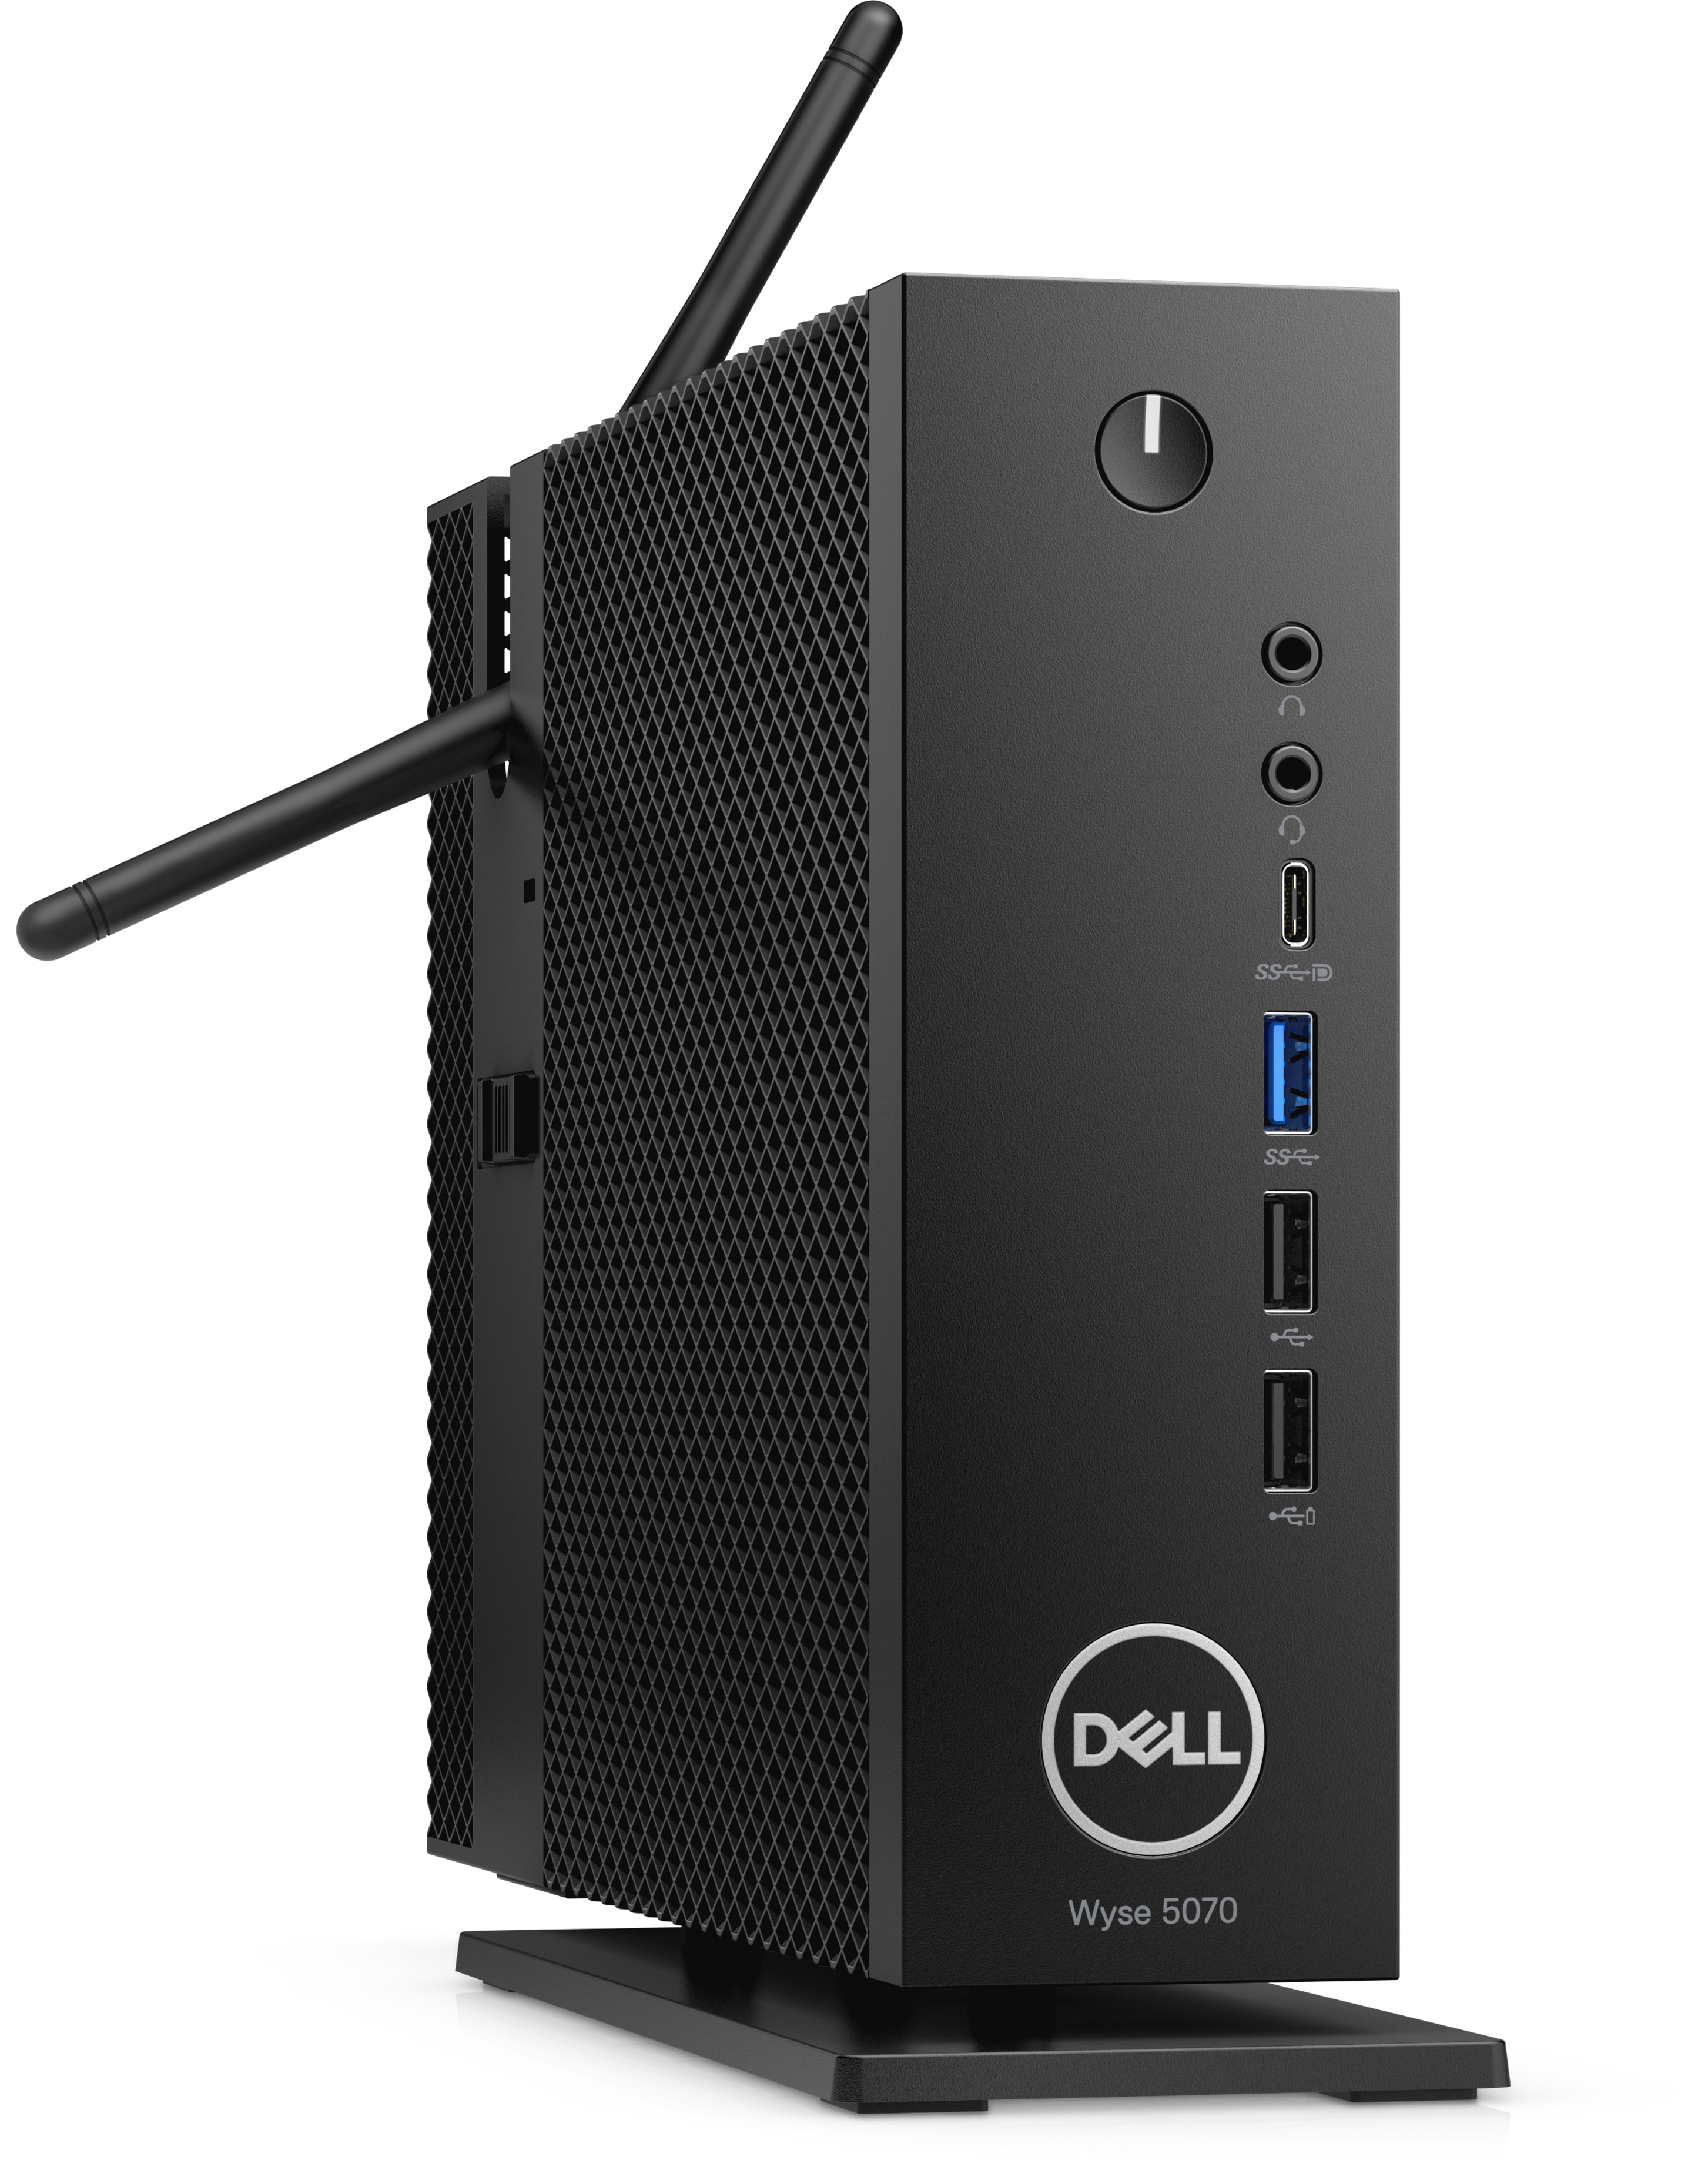 Wyse 5070 Thin Client PC | Dell Ireland